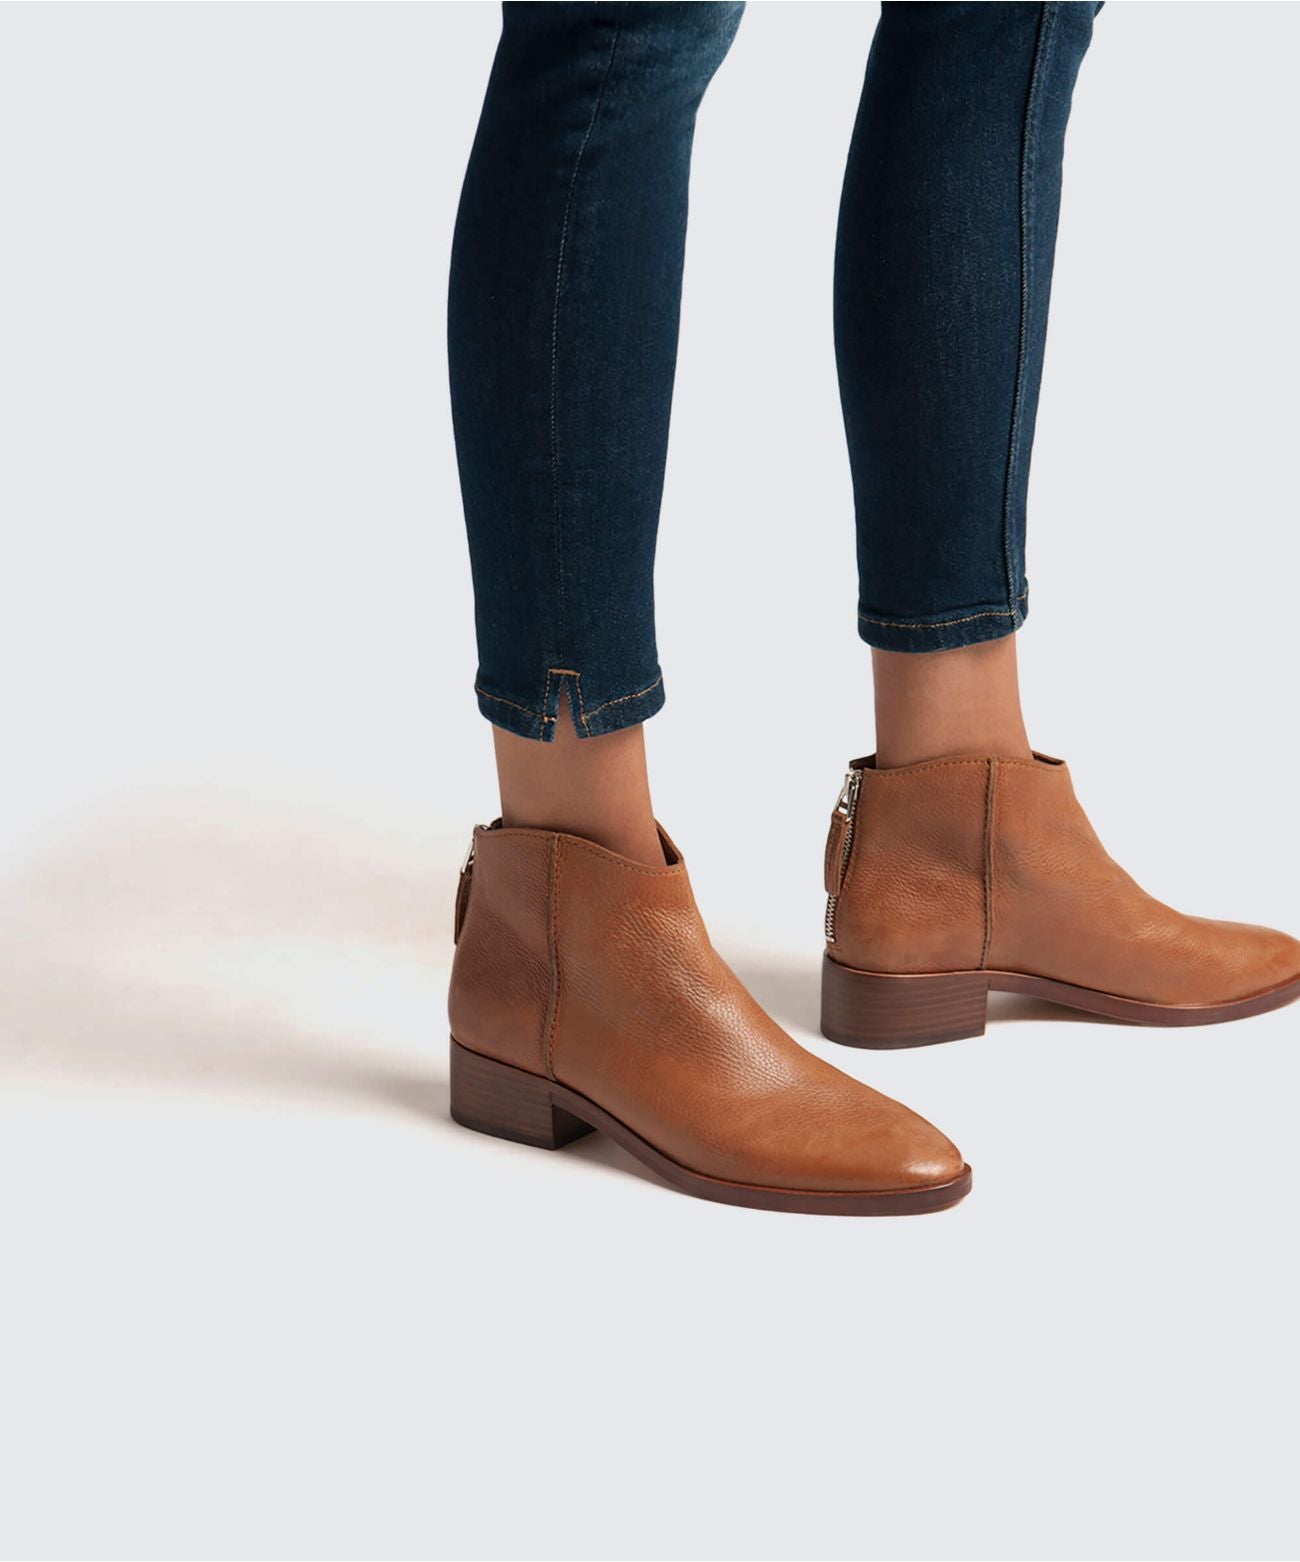 TUCKER BOOTIES IN DK TAUPE – Dolce Vita